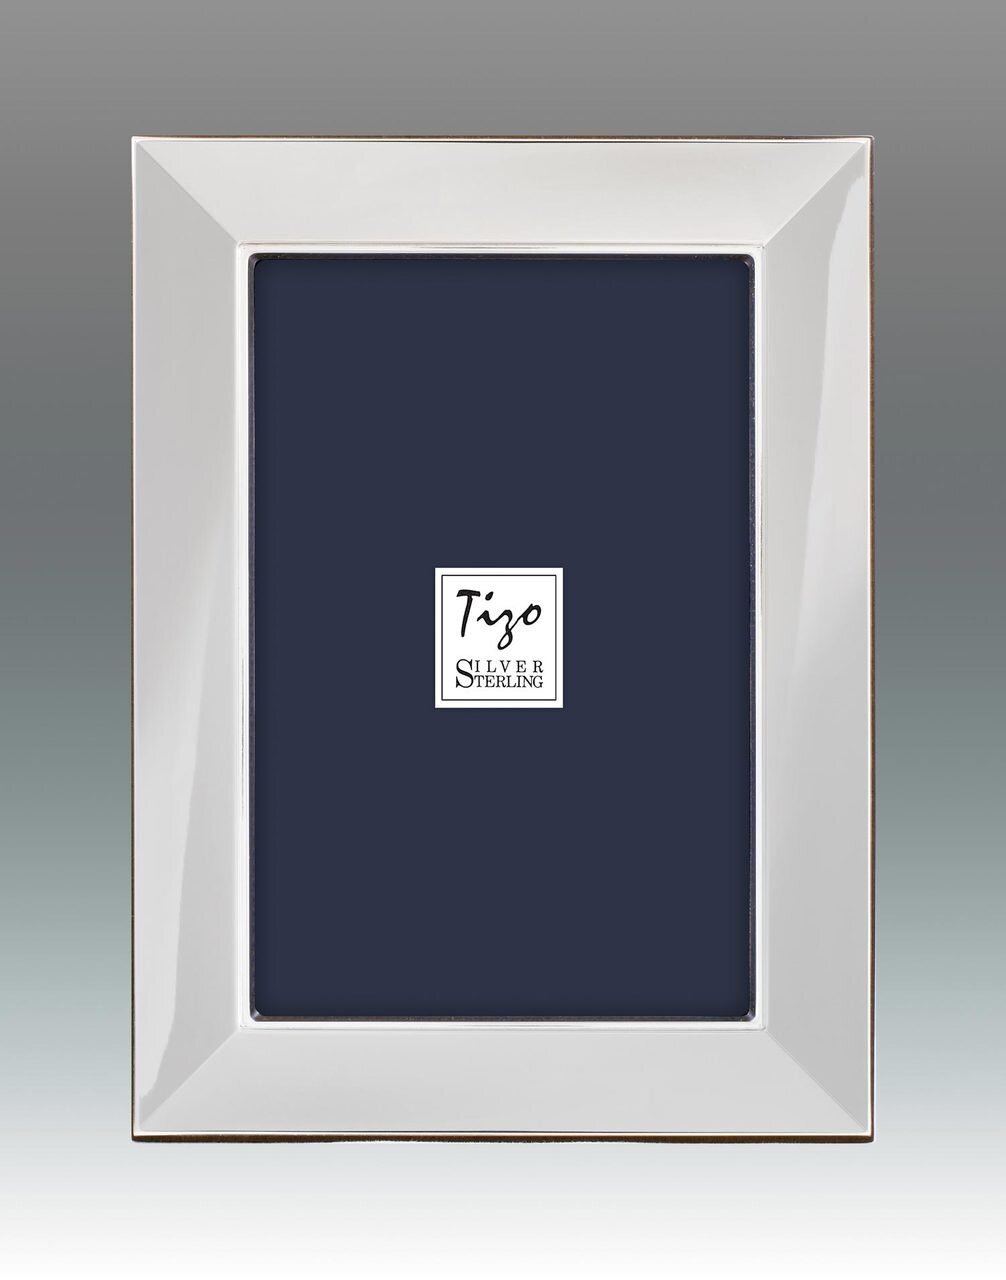 Tizo Empires 8 x 10 Inch Sterling Silver Picture Frame